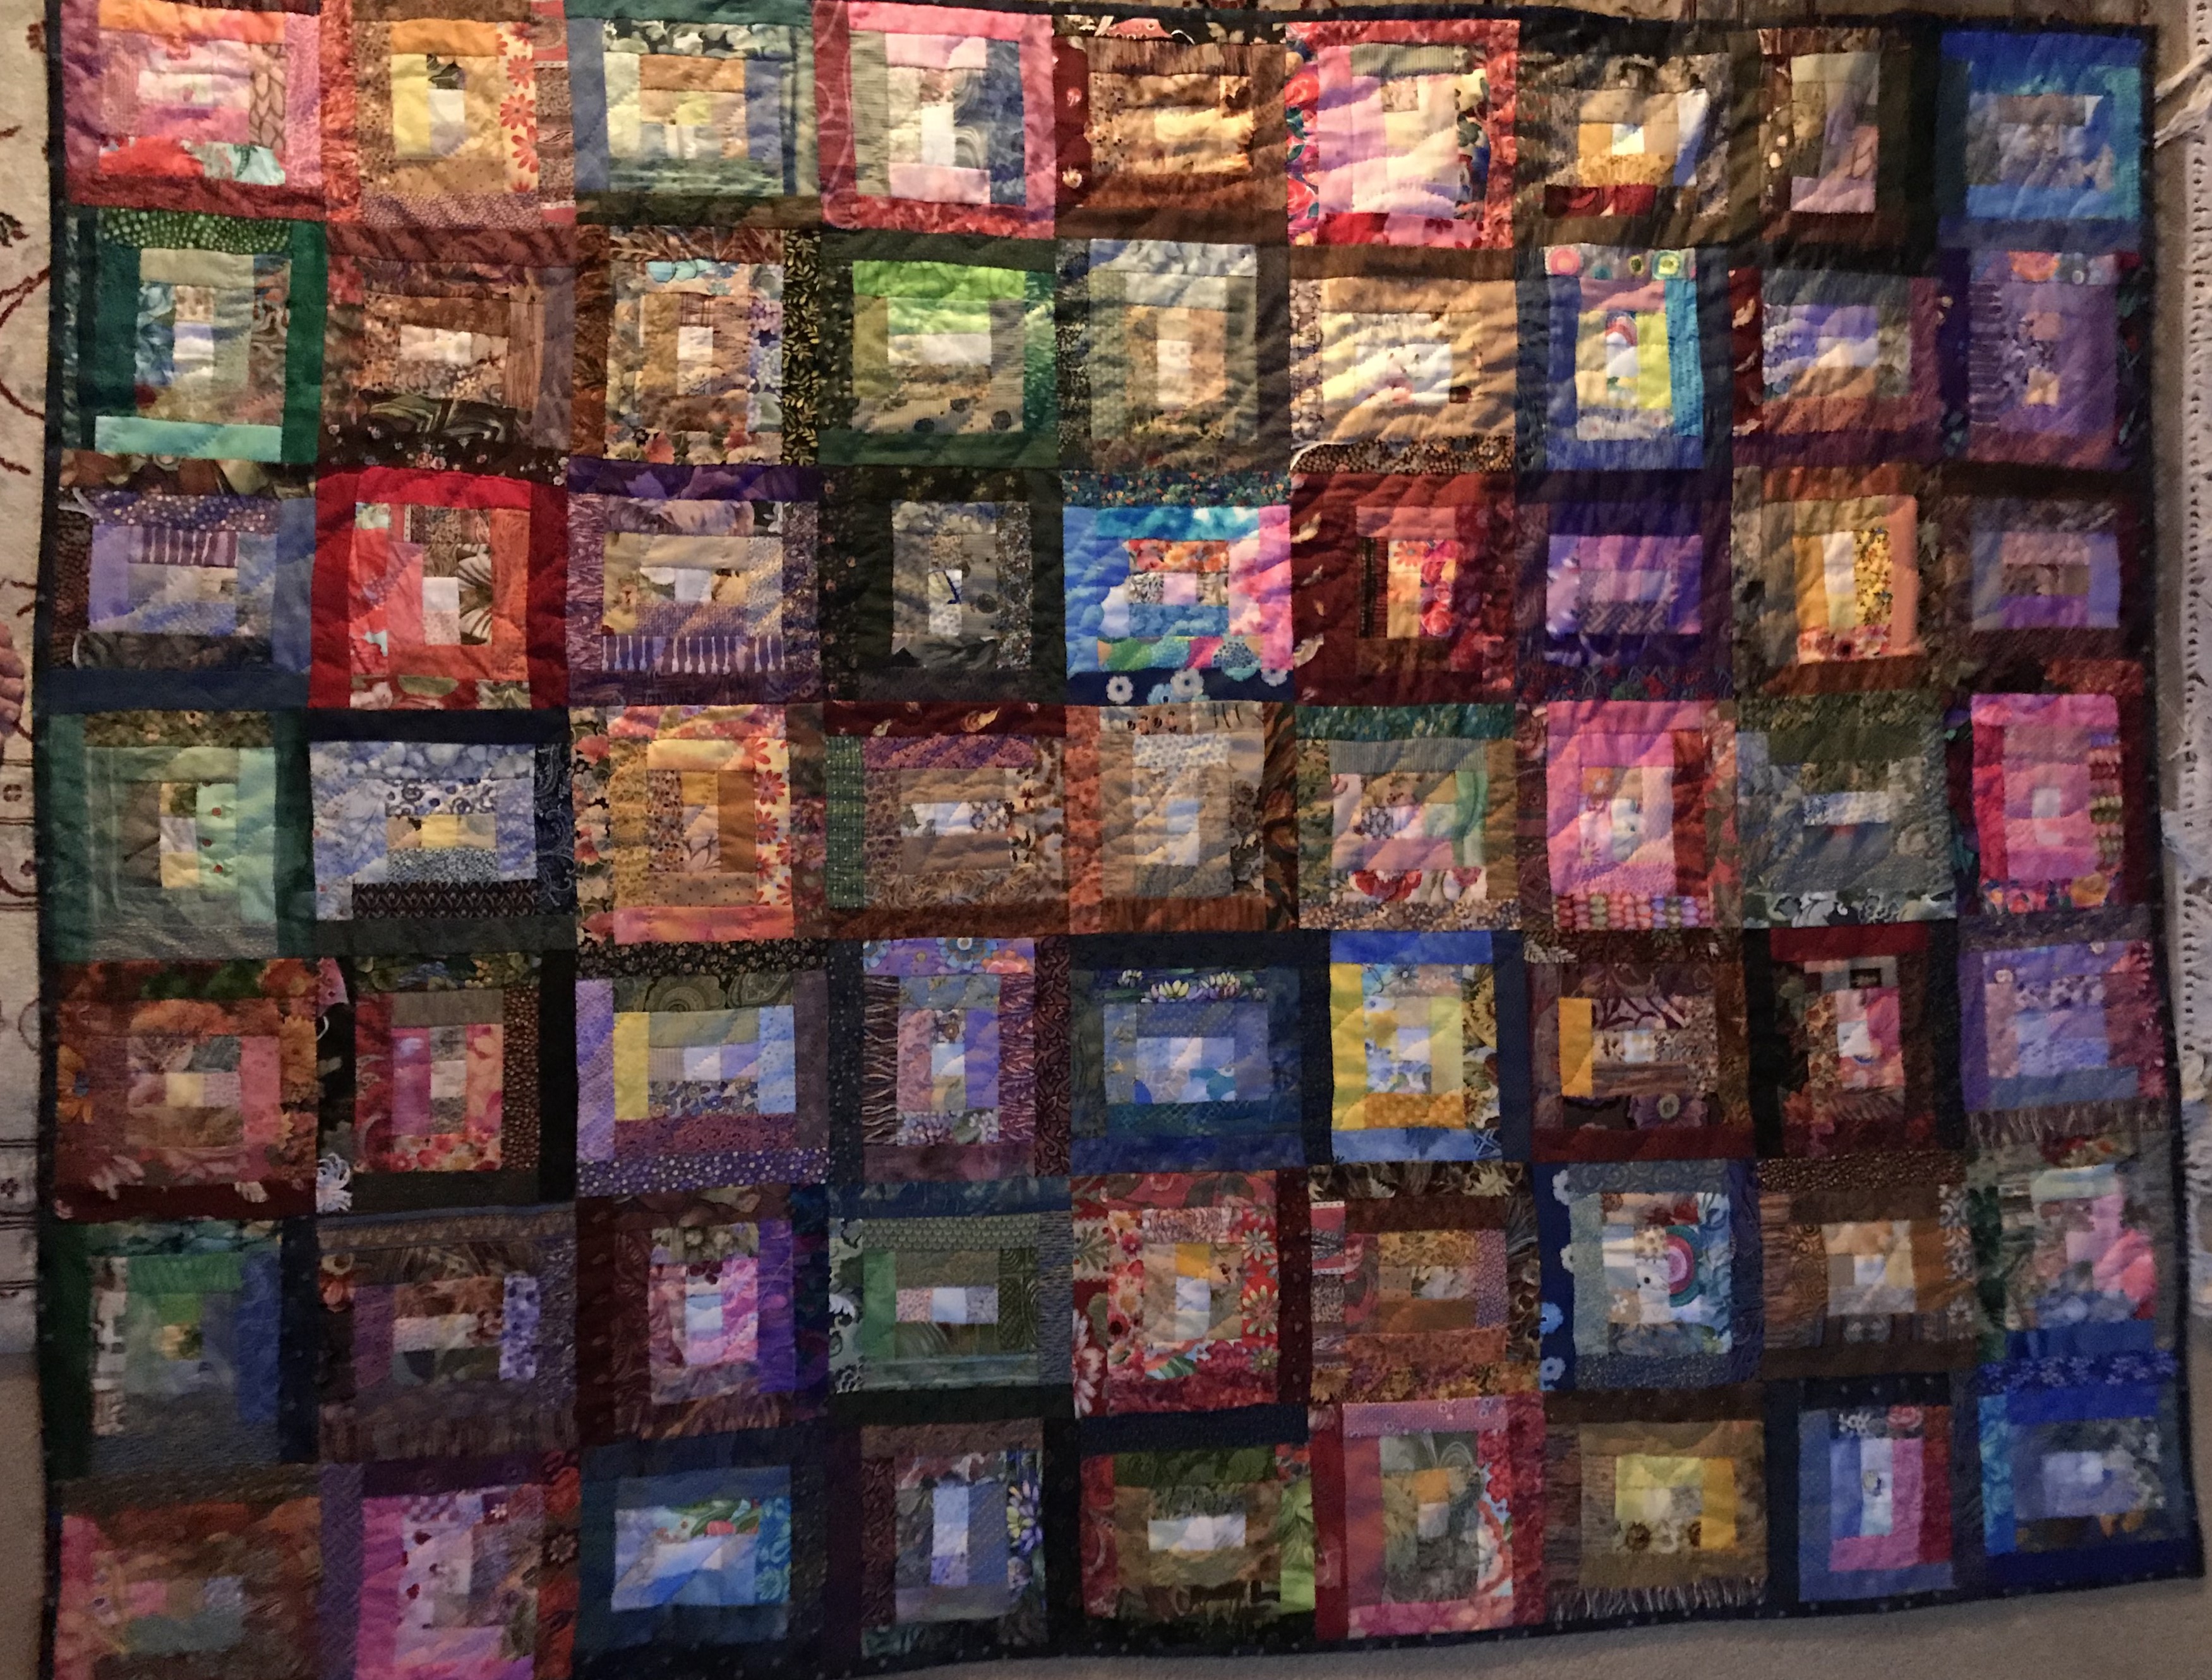 A very colorful quilt made using strips of fabric.